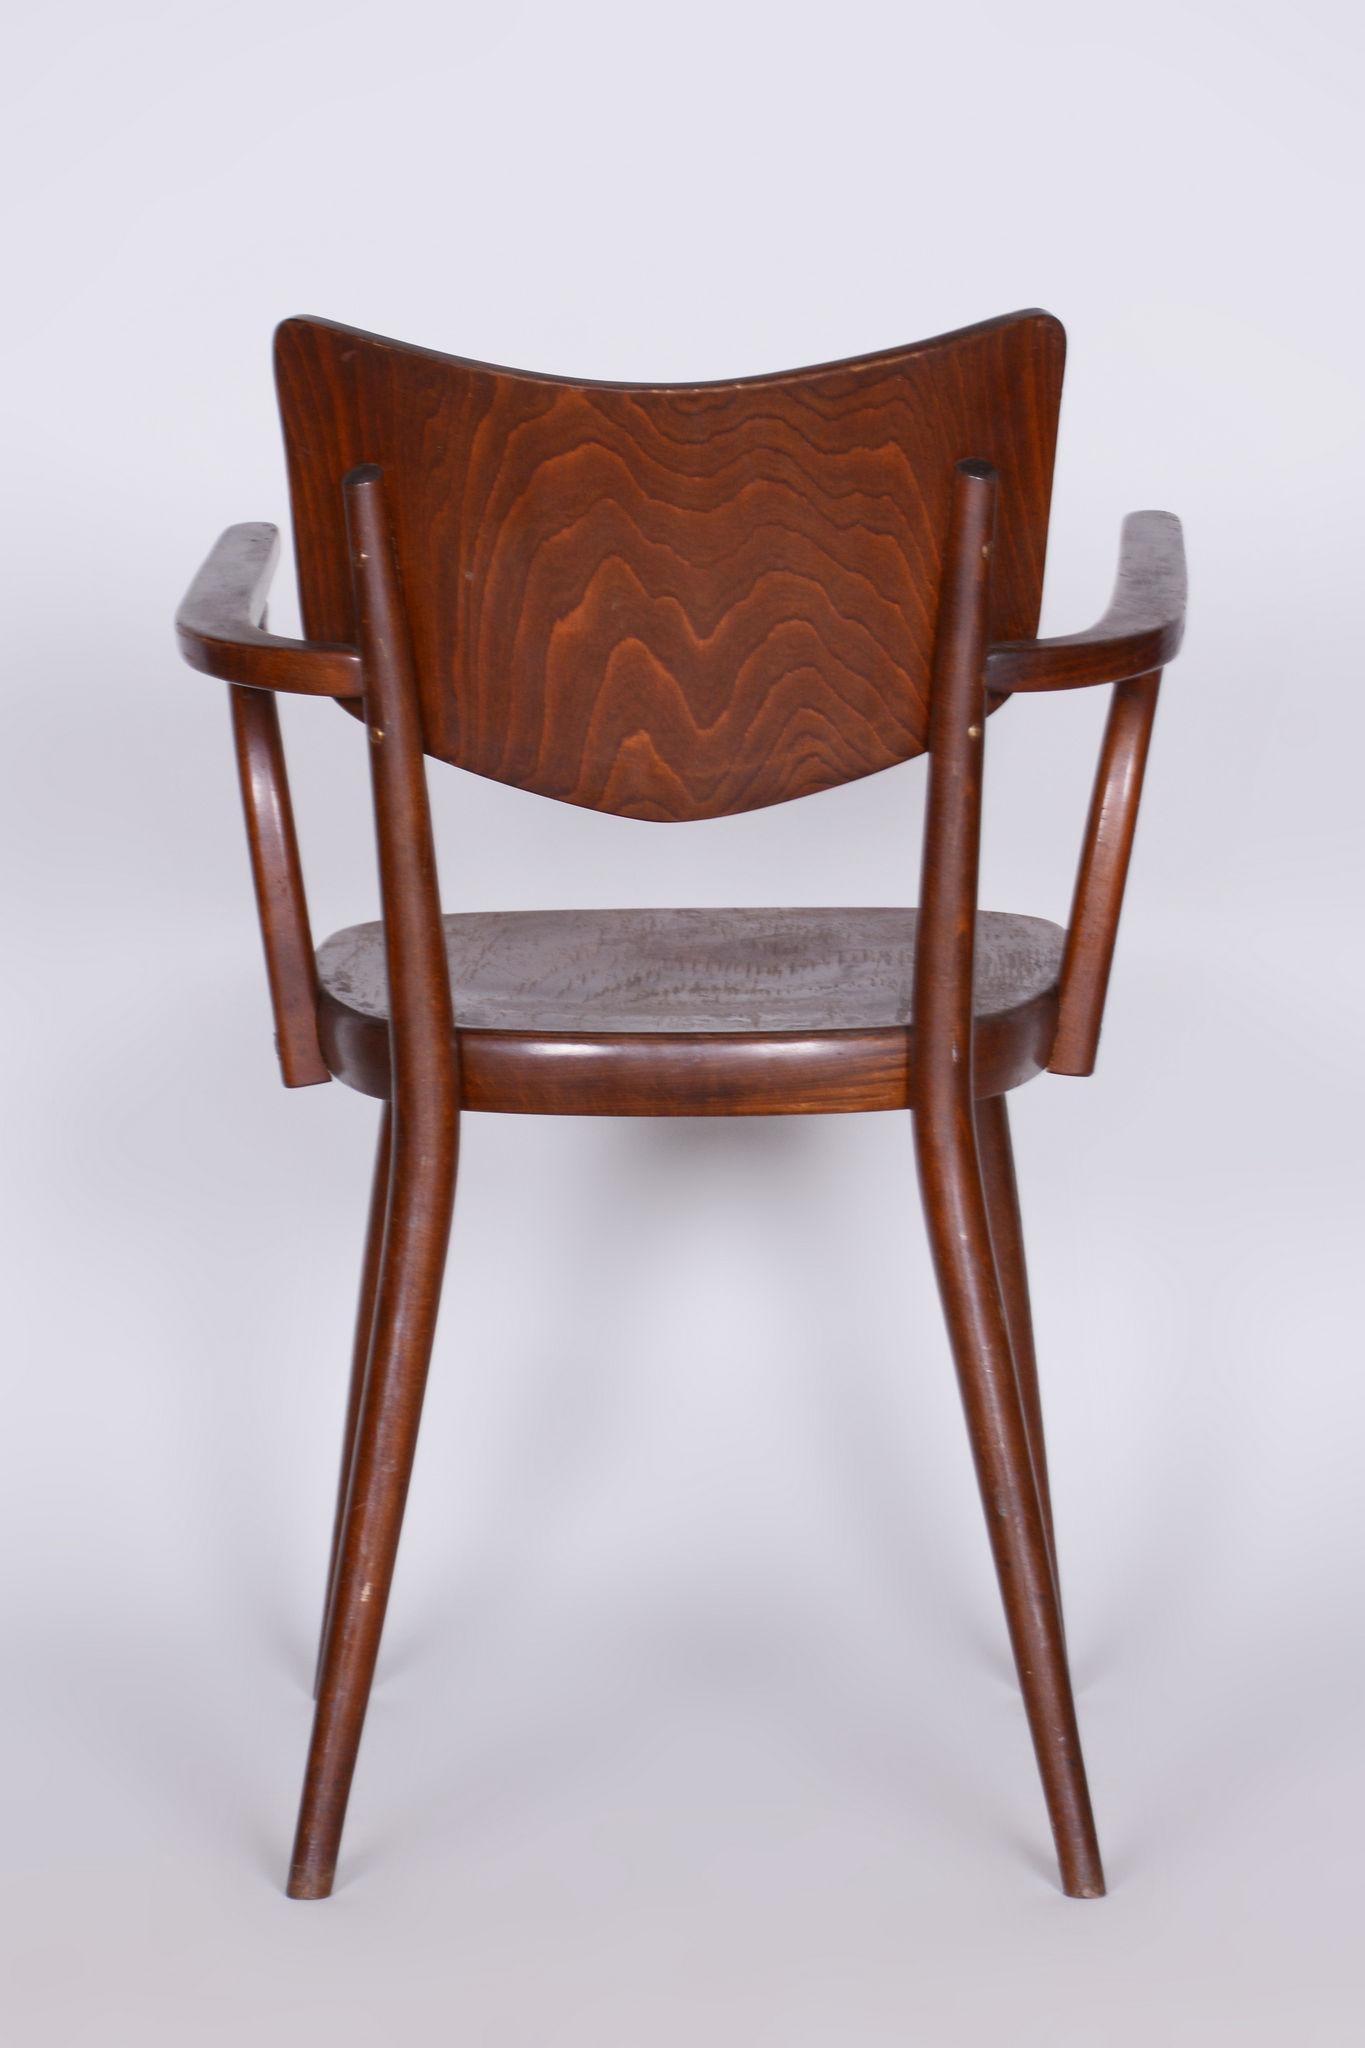 Original ArtDeco Beech Chair with Armrests by Ton, R. Hofman, Czechia, 1940s In Good Condition For Sale In Horomerice, CZ